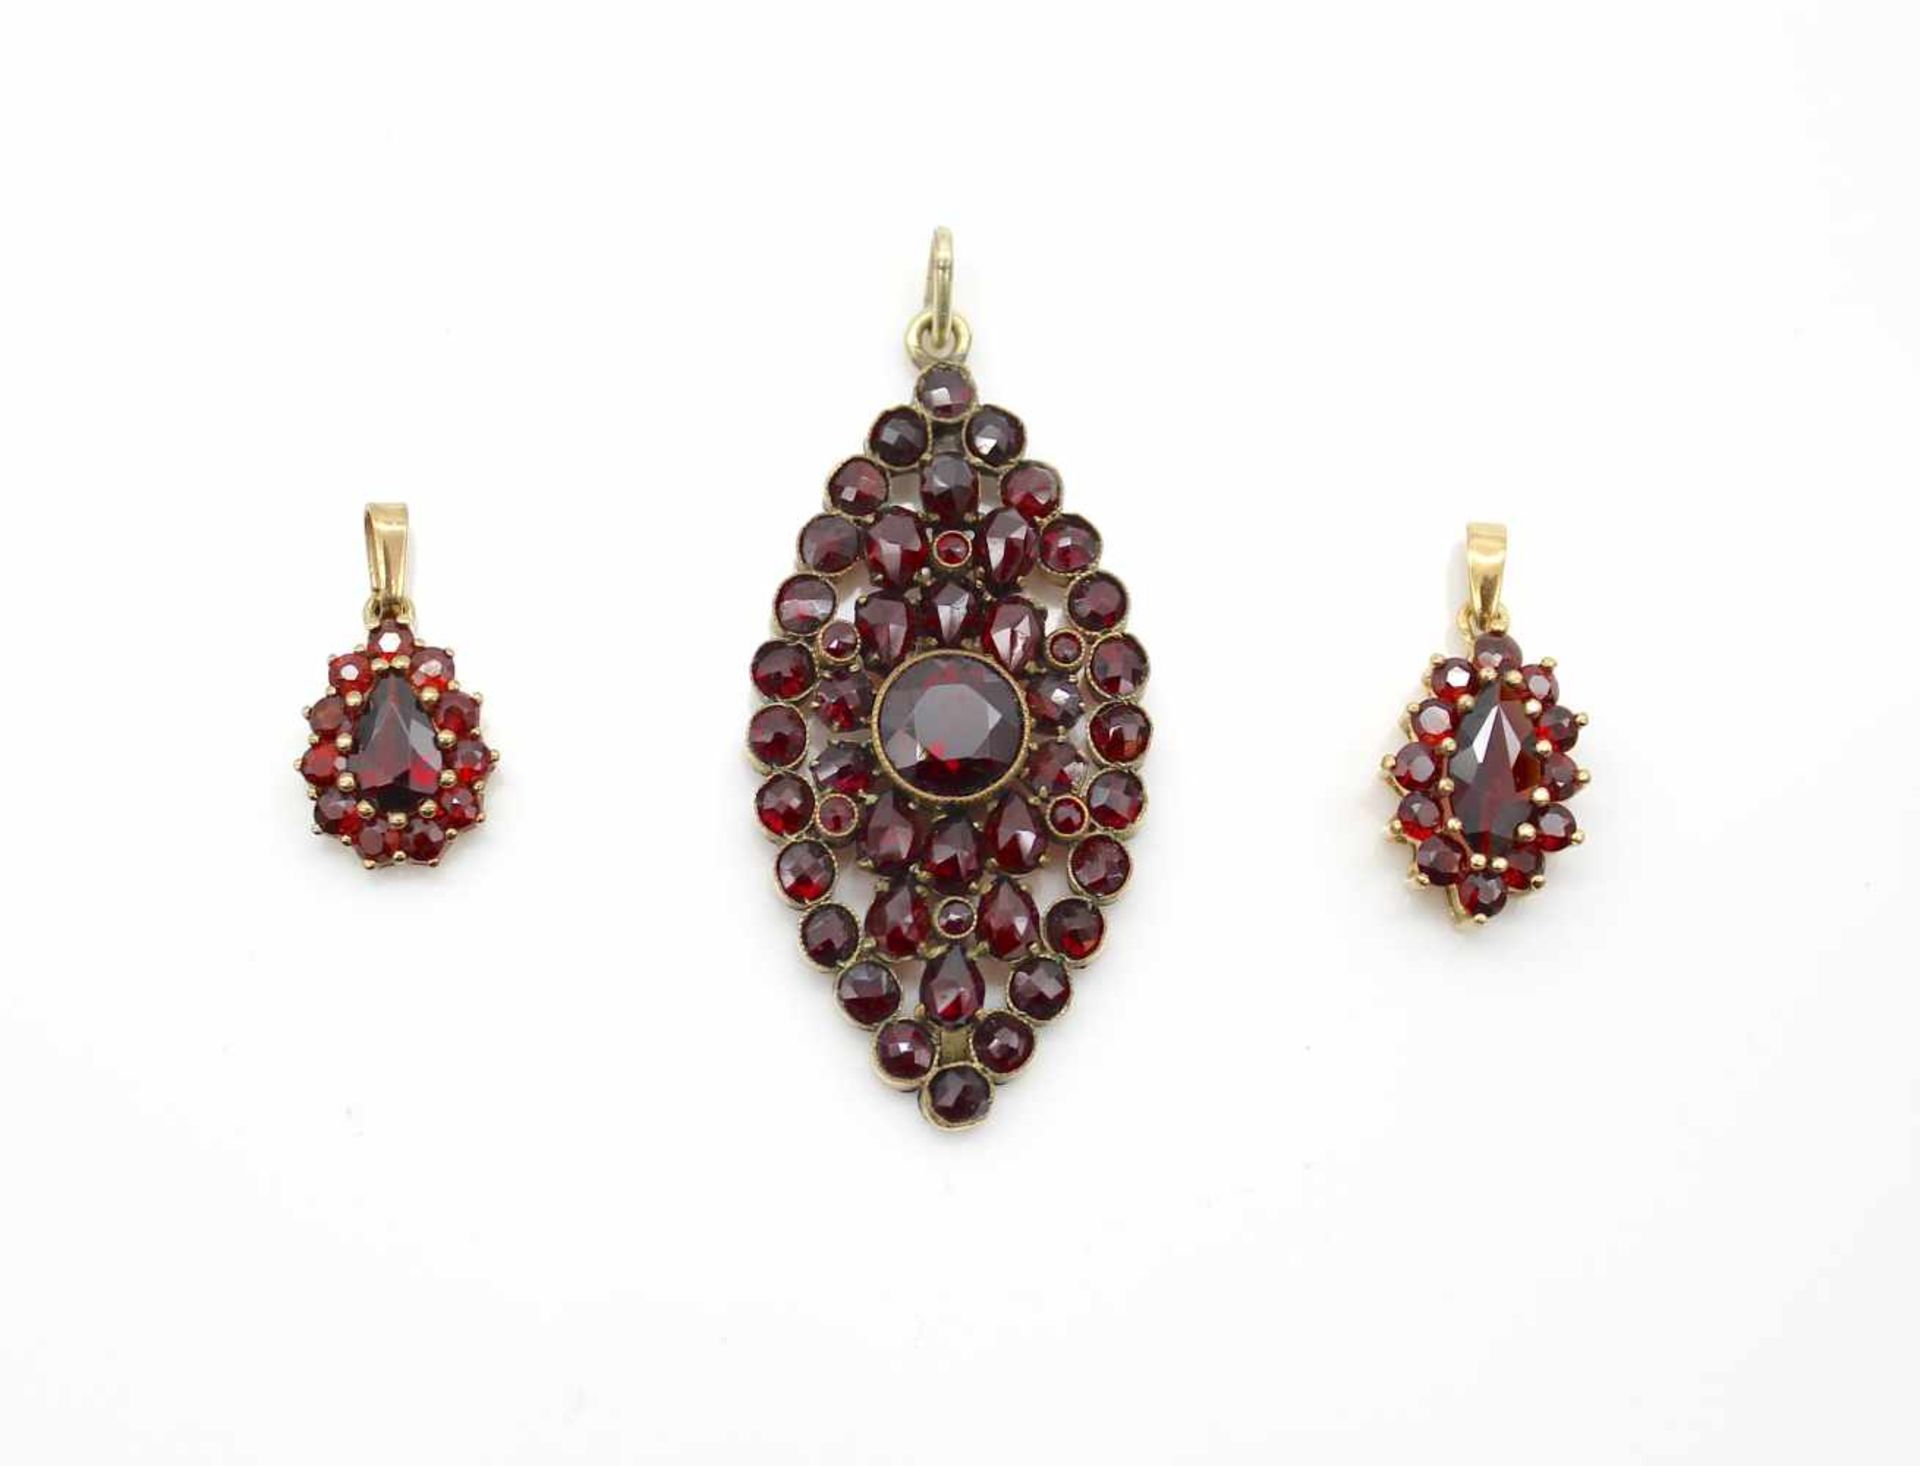 2 pendants with 333 gold garnets, Dimensions: 11.3 x 16.3 mm and 10.6 x 14.1 mm, weight 3 g,1 - Image 2 of 3